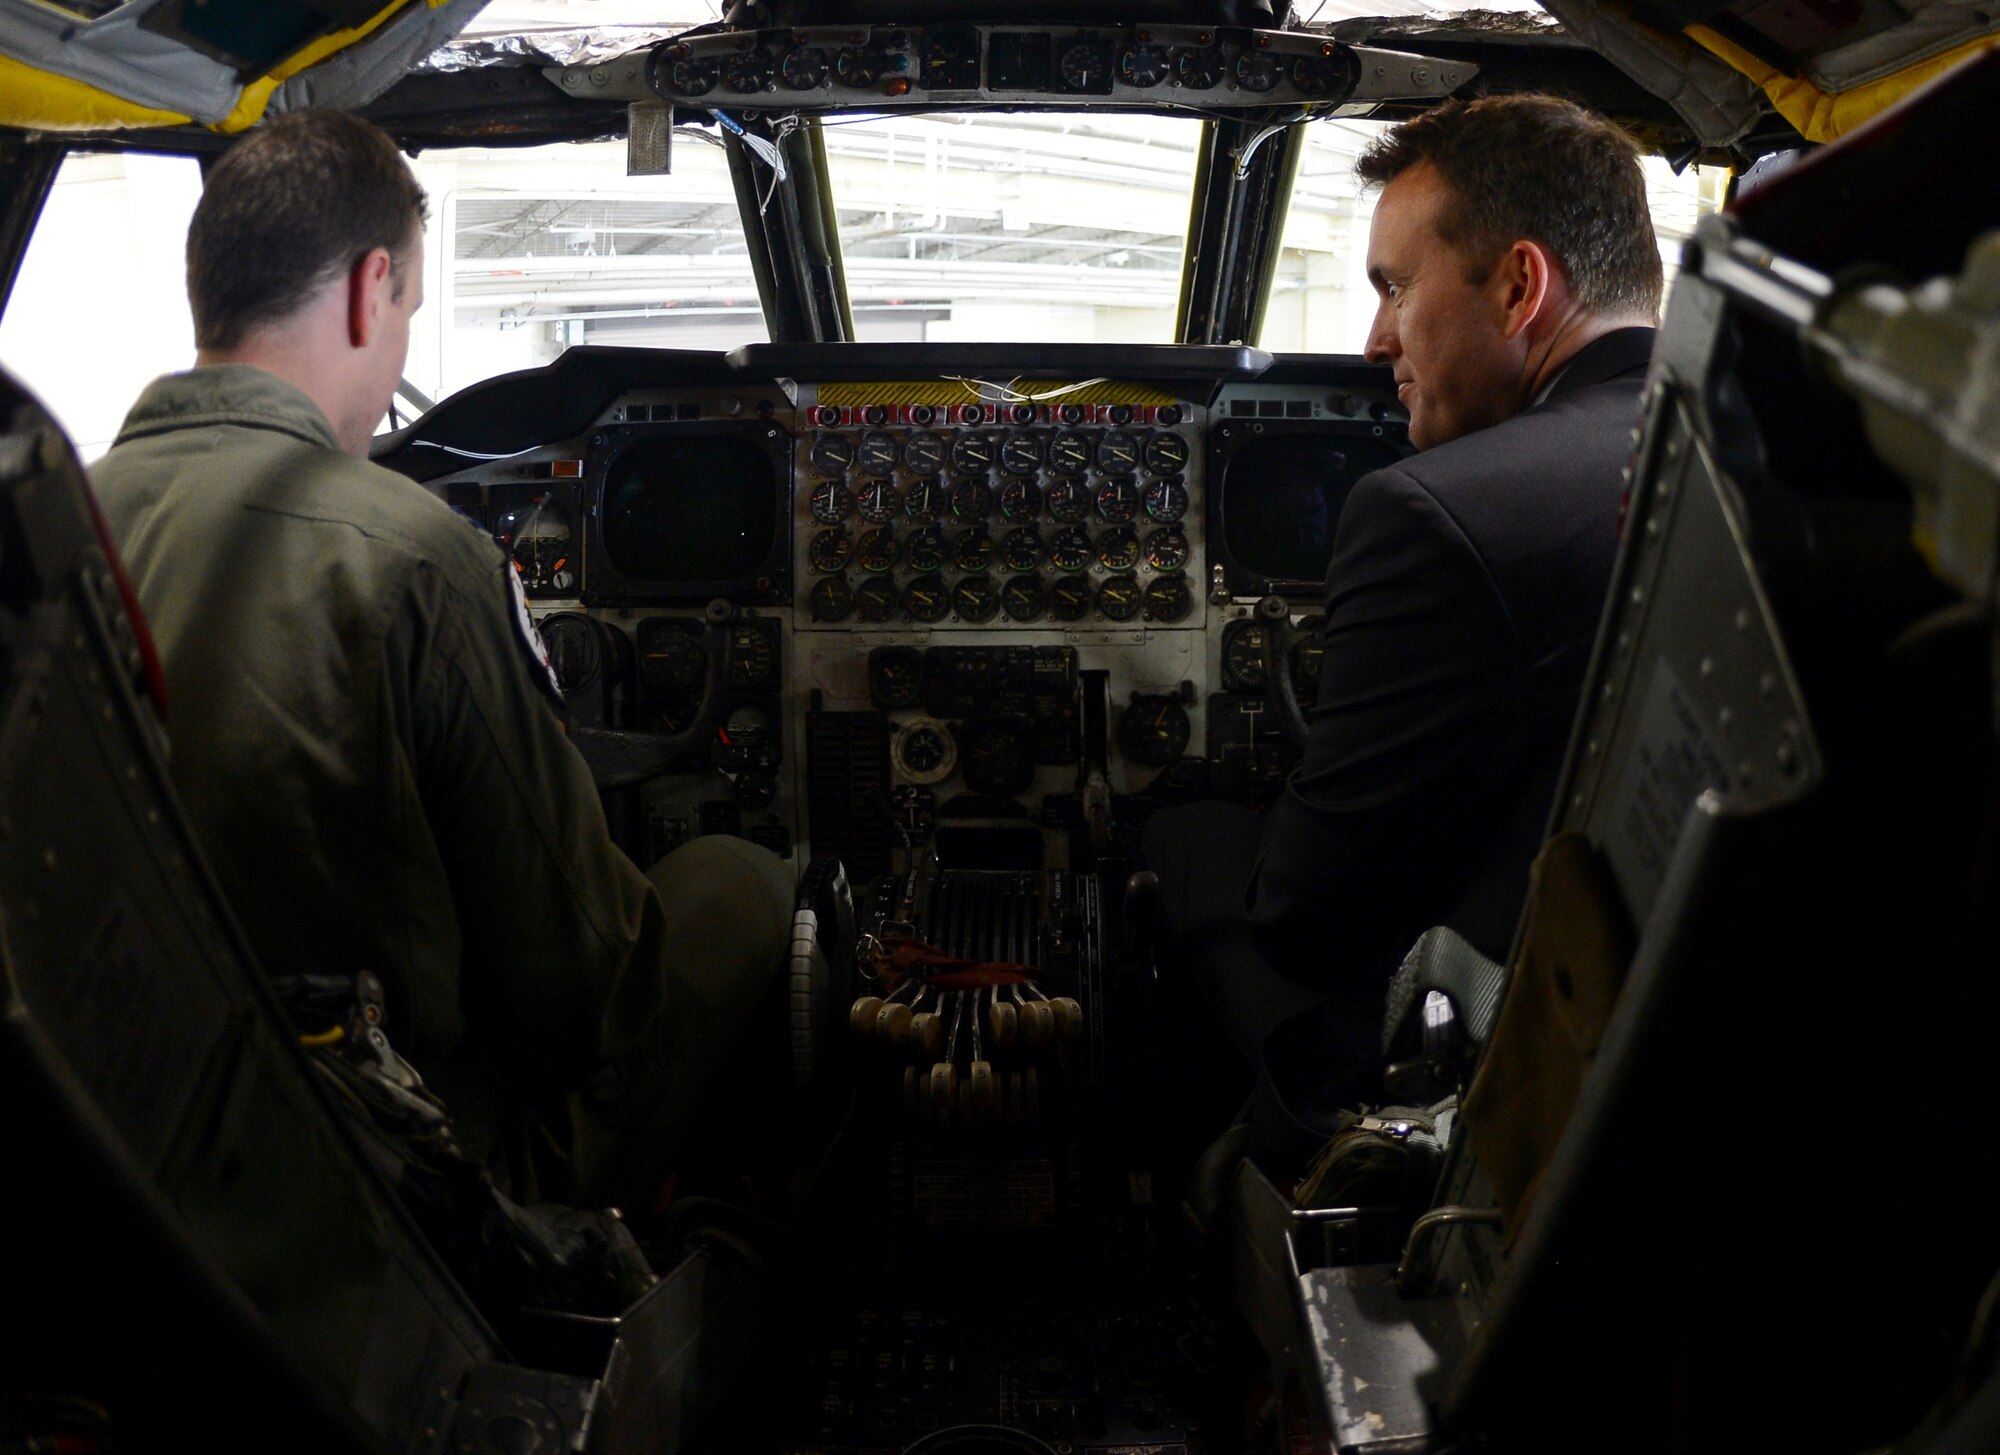 Capt. Shane Praiswater speaks with Acting Secretary of the Air Force Eric Fanning about the flight deck of the B-52H Stratofortress during Fanning's visit to Barksdale Air Force Base, La., Aug. 14, 2013. Fanning was introduced to the 2nd Bomb Wing's mission and the capabilities of the B-52 during a tour of the bomber. Praiswater is a 20th Bomb Squadron Charlie Flight assistant commander.